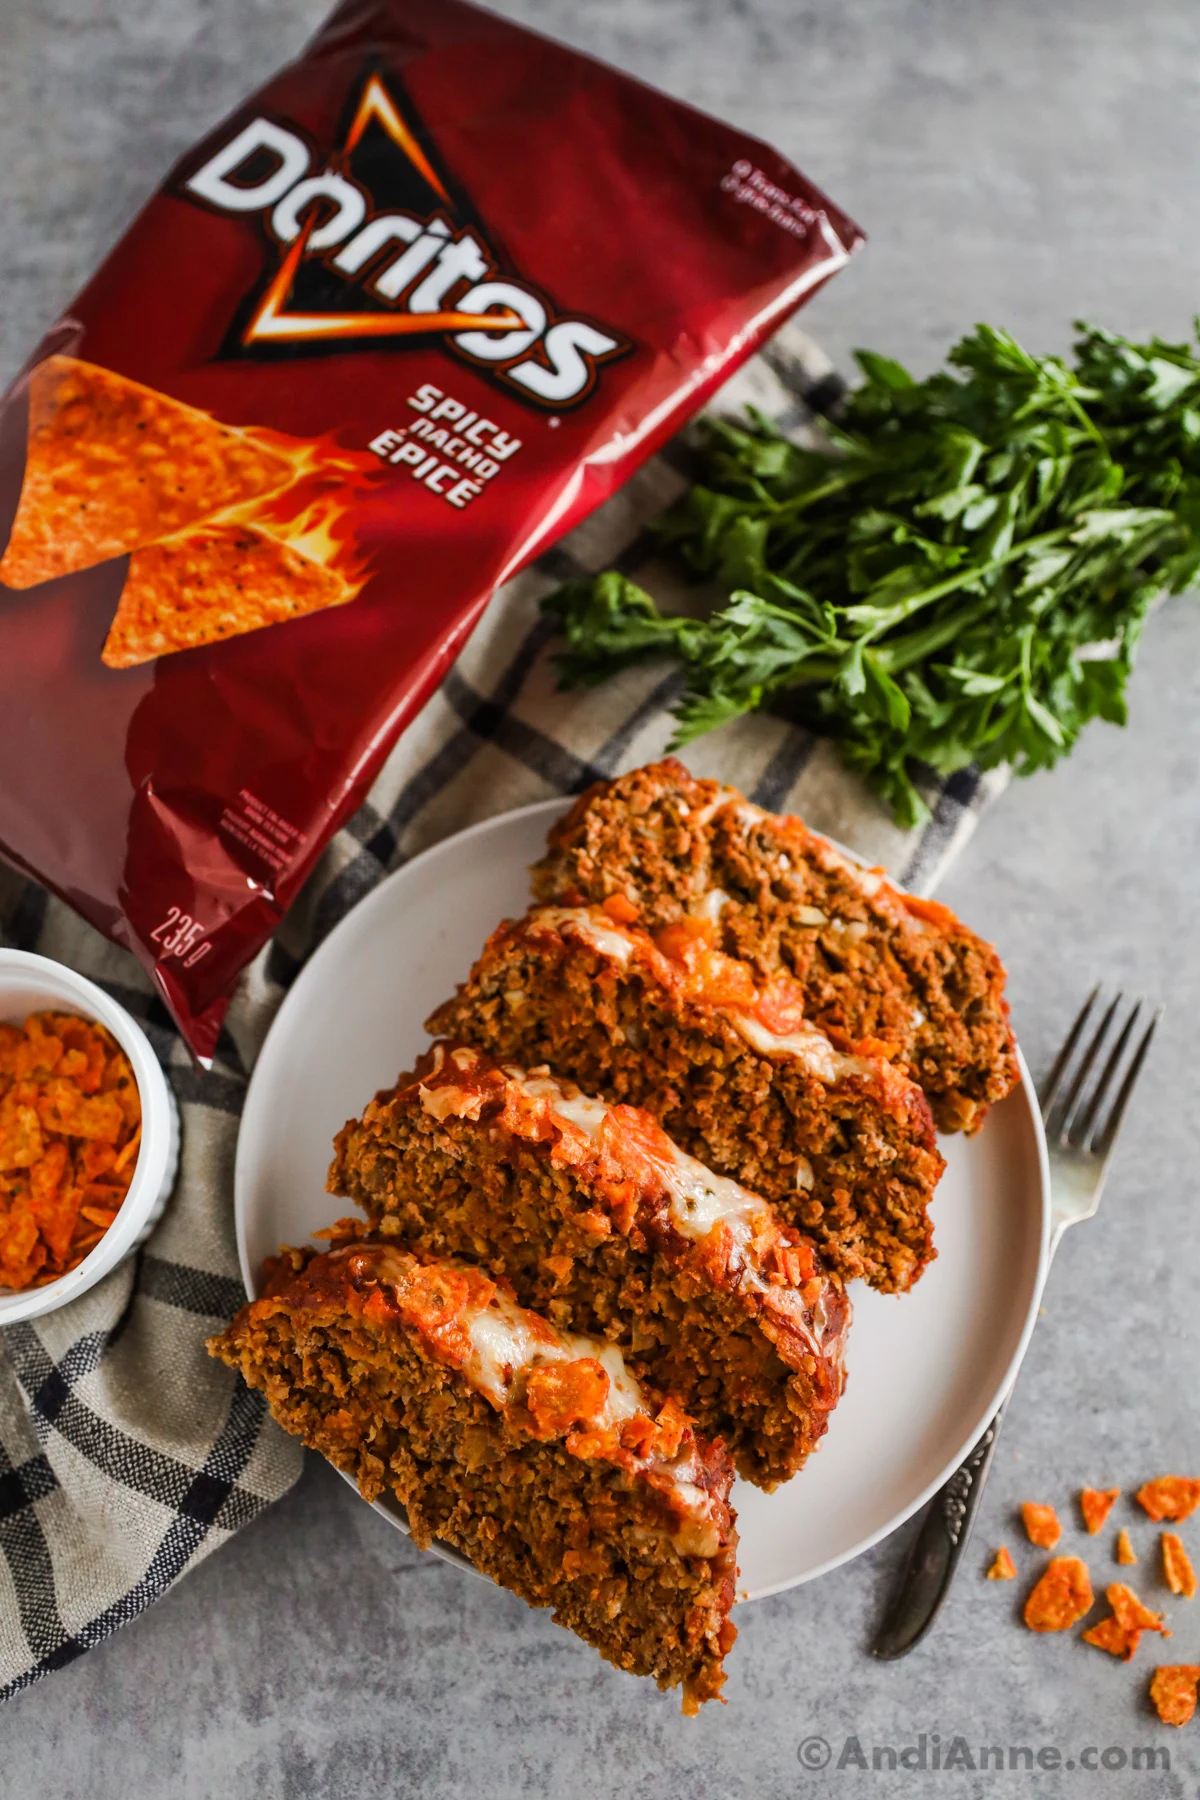 Slices of taco meatloaf on a plate with Dorito chip bag, parsley and kitchen towel in background.